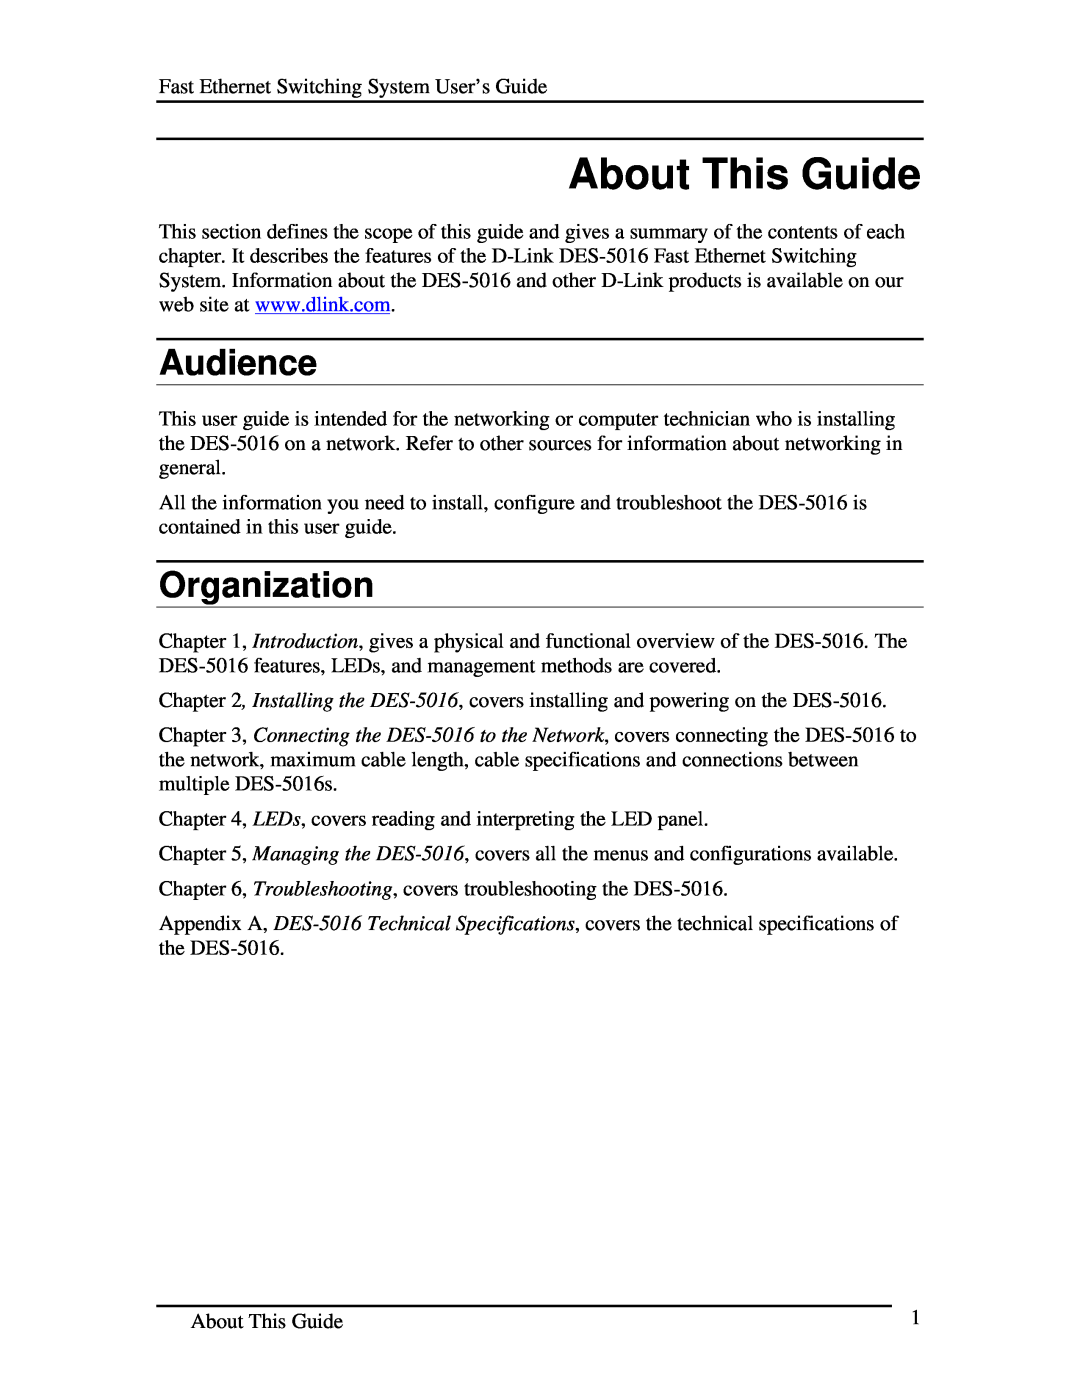 D-Link DES-5016 manual About This Guide, Audience, Organization 